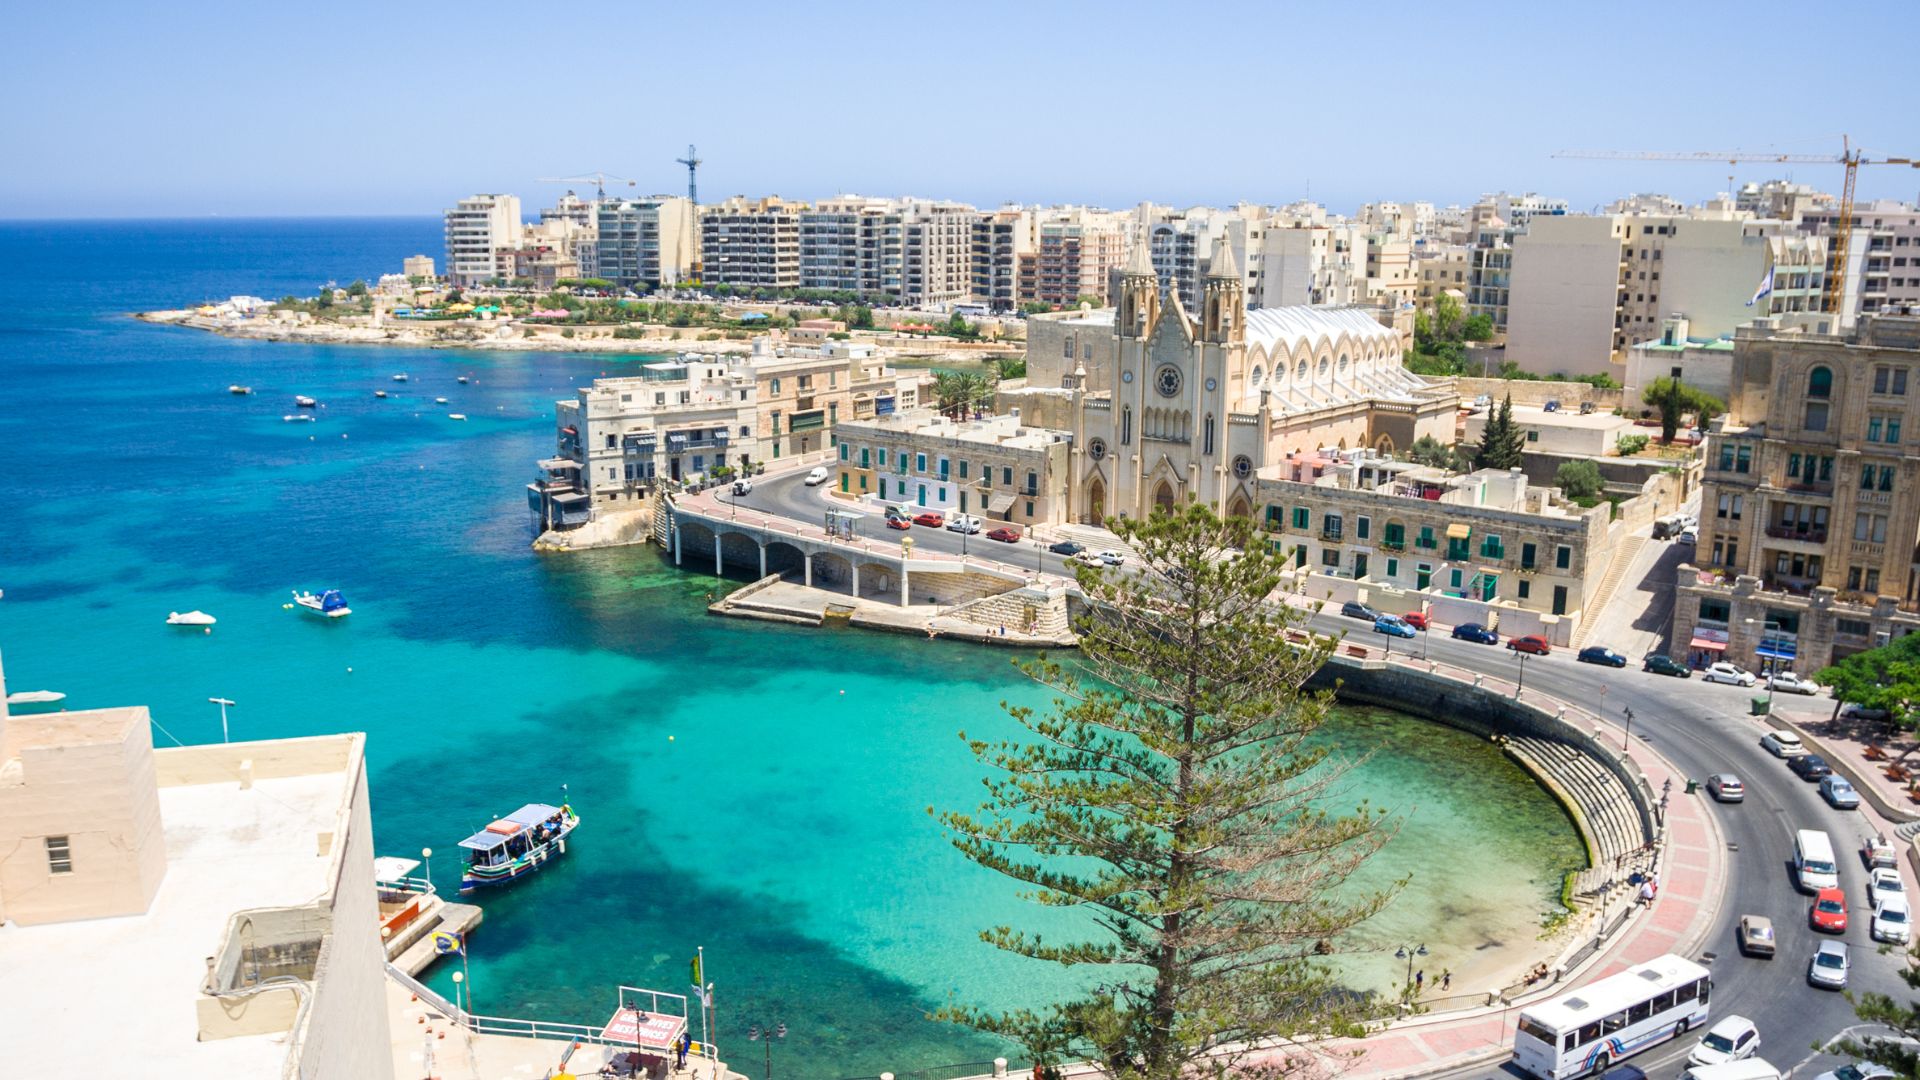 South African digital nomads can now experience the magic of Malta